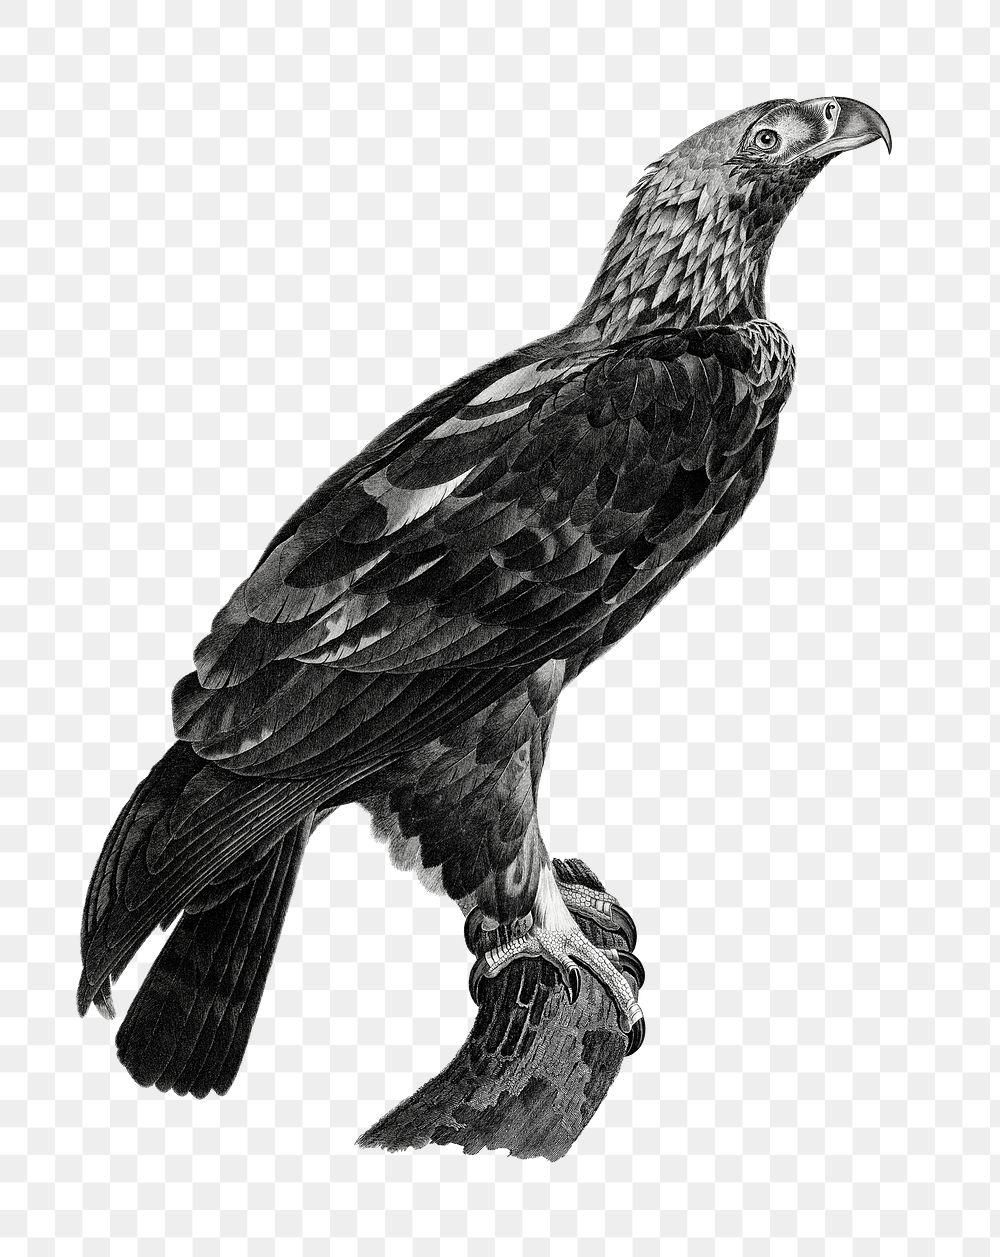 Bird eagle black and white png